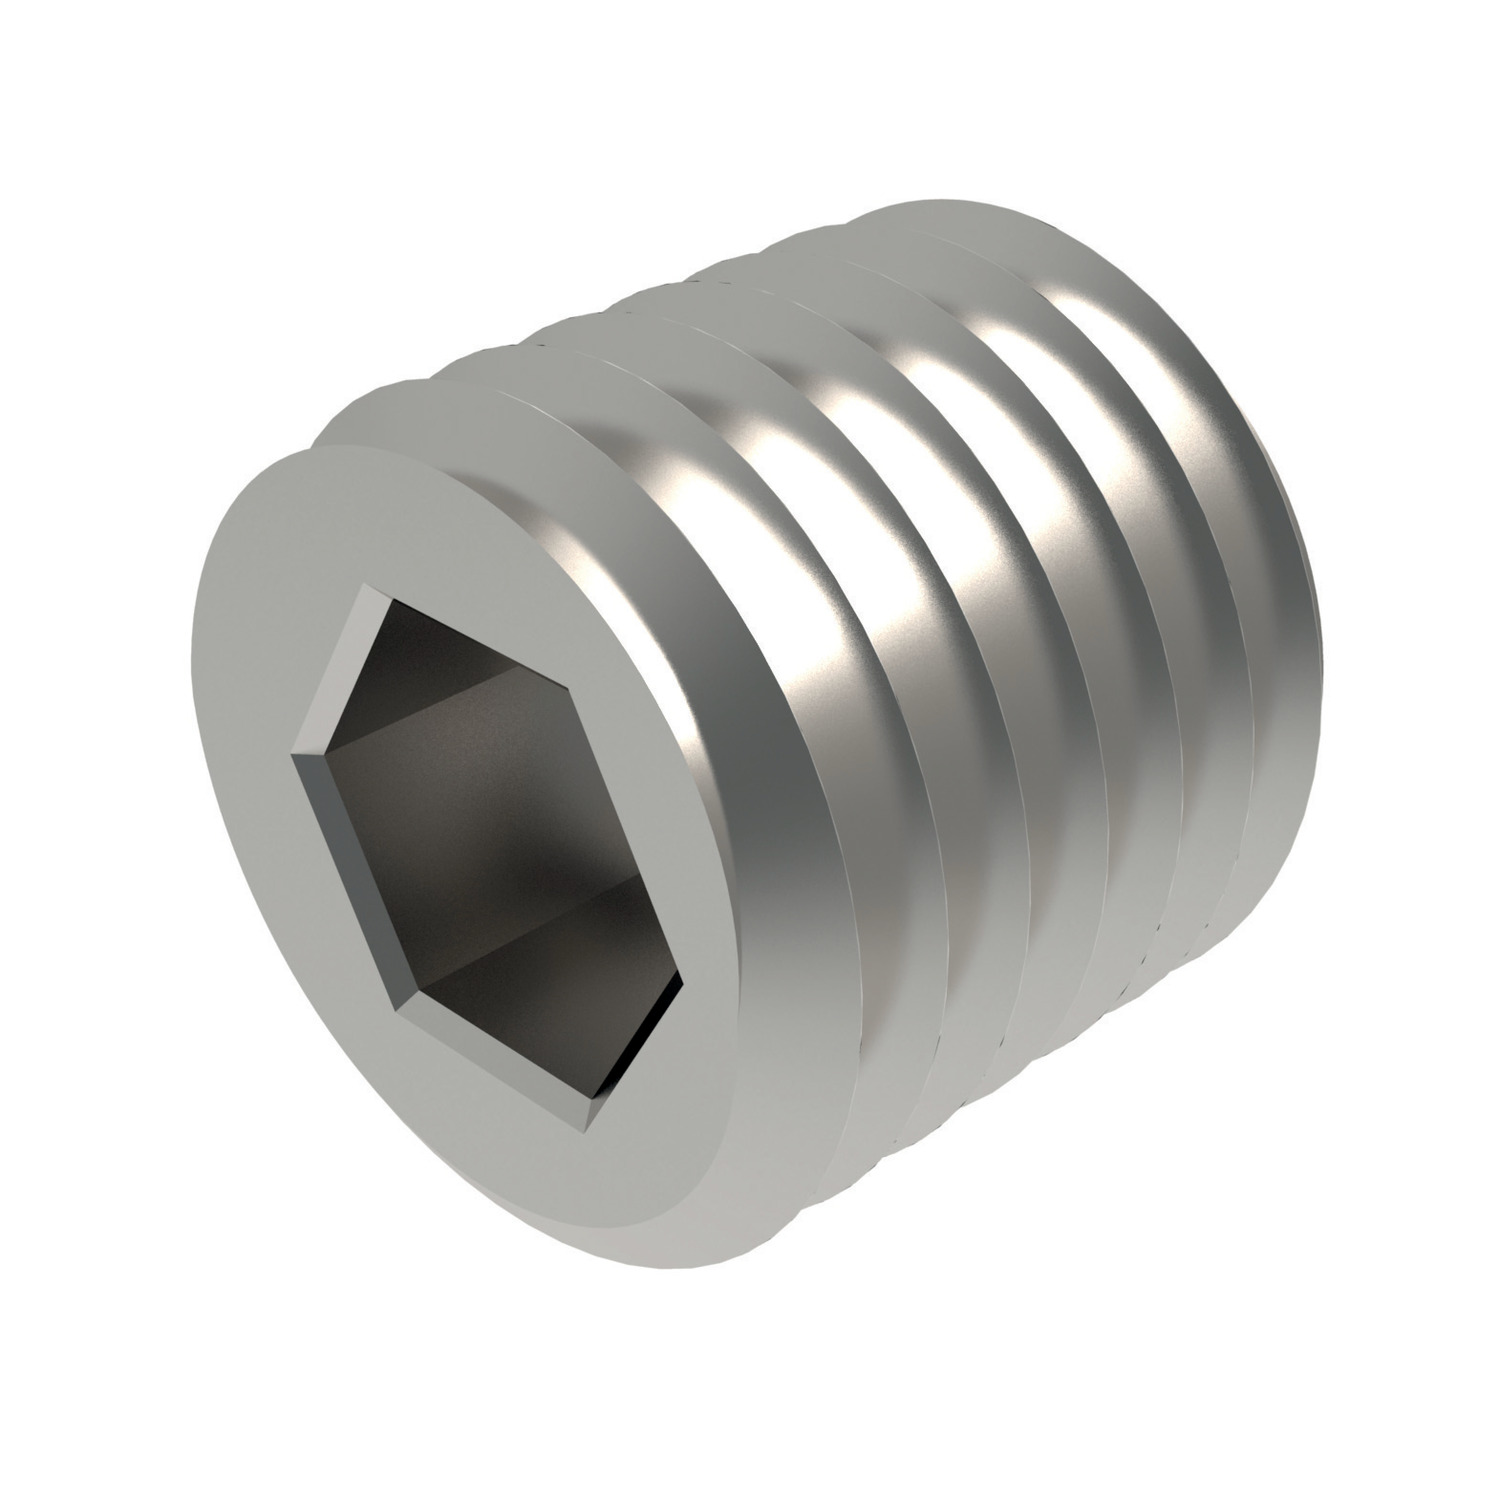 P0199.100-021-A2 Threaded Restrictor M10x1 2.08 orifice A2 stainless steel. DANGER: Ensure this part is installed according to instructions in the product data sheet and installation notes. Holes must be completely free of oil, grease and debris.